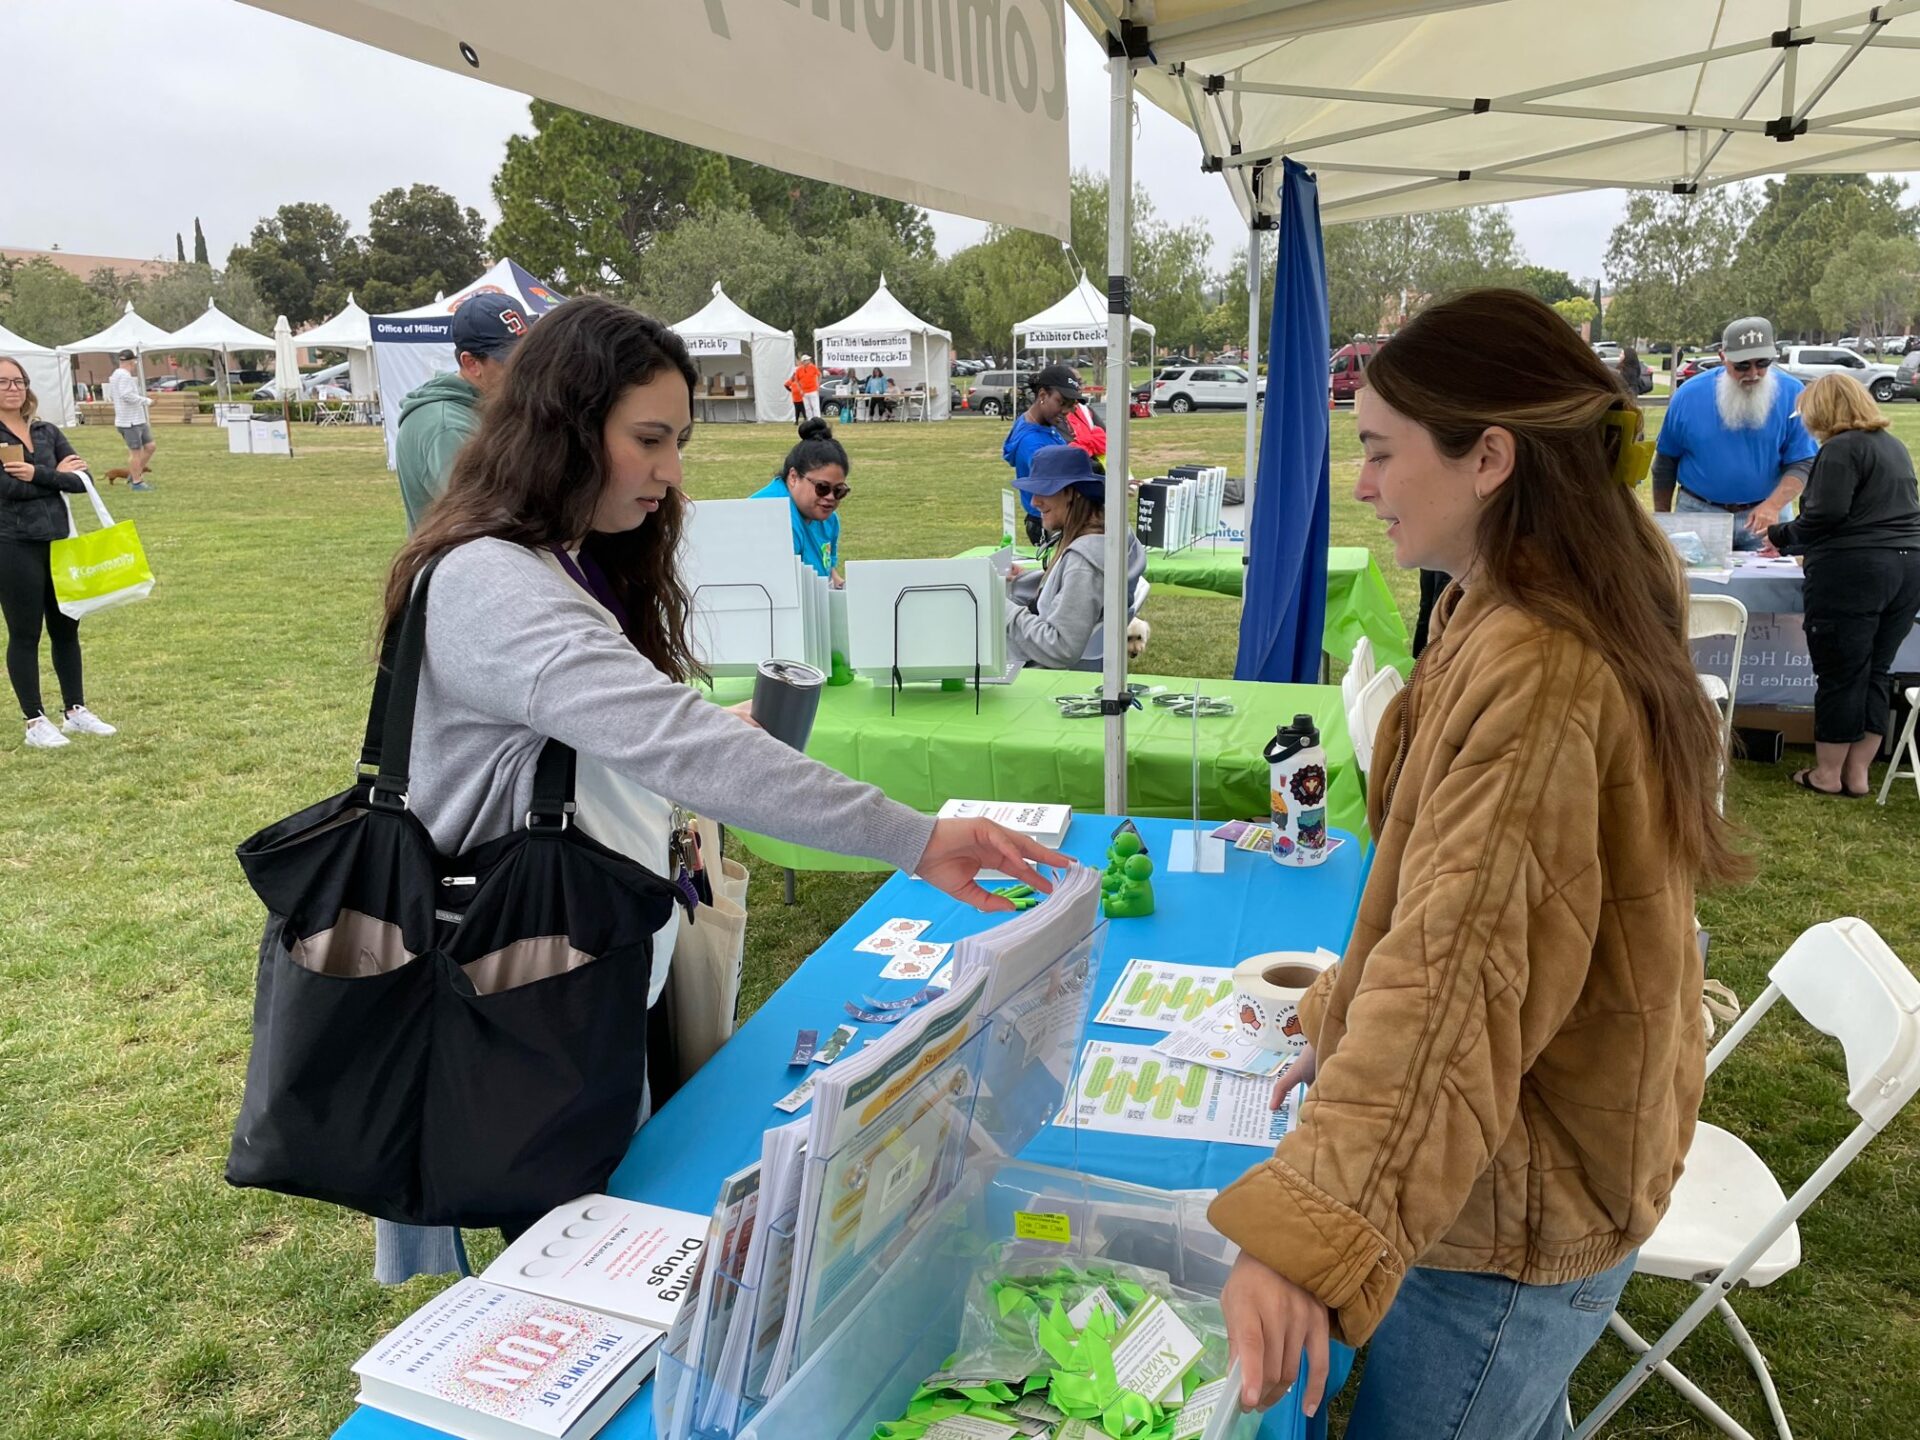 Pause for Your Mental Wellbeing at NAMIWalks and Wellness Expo on Saturday – San Diego County News Center